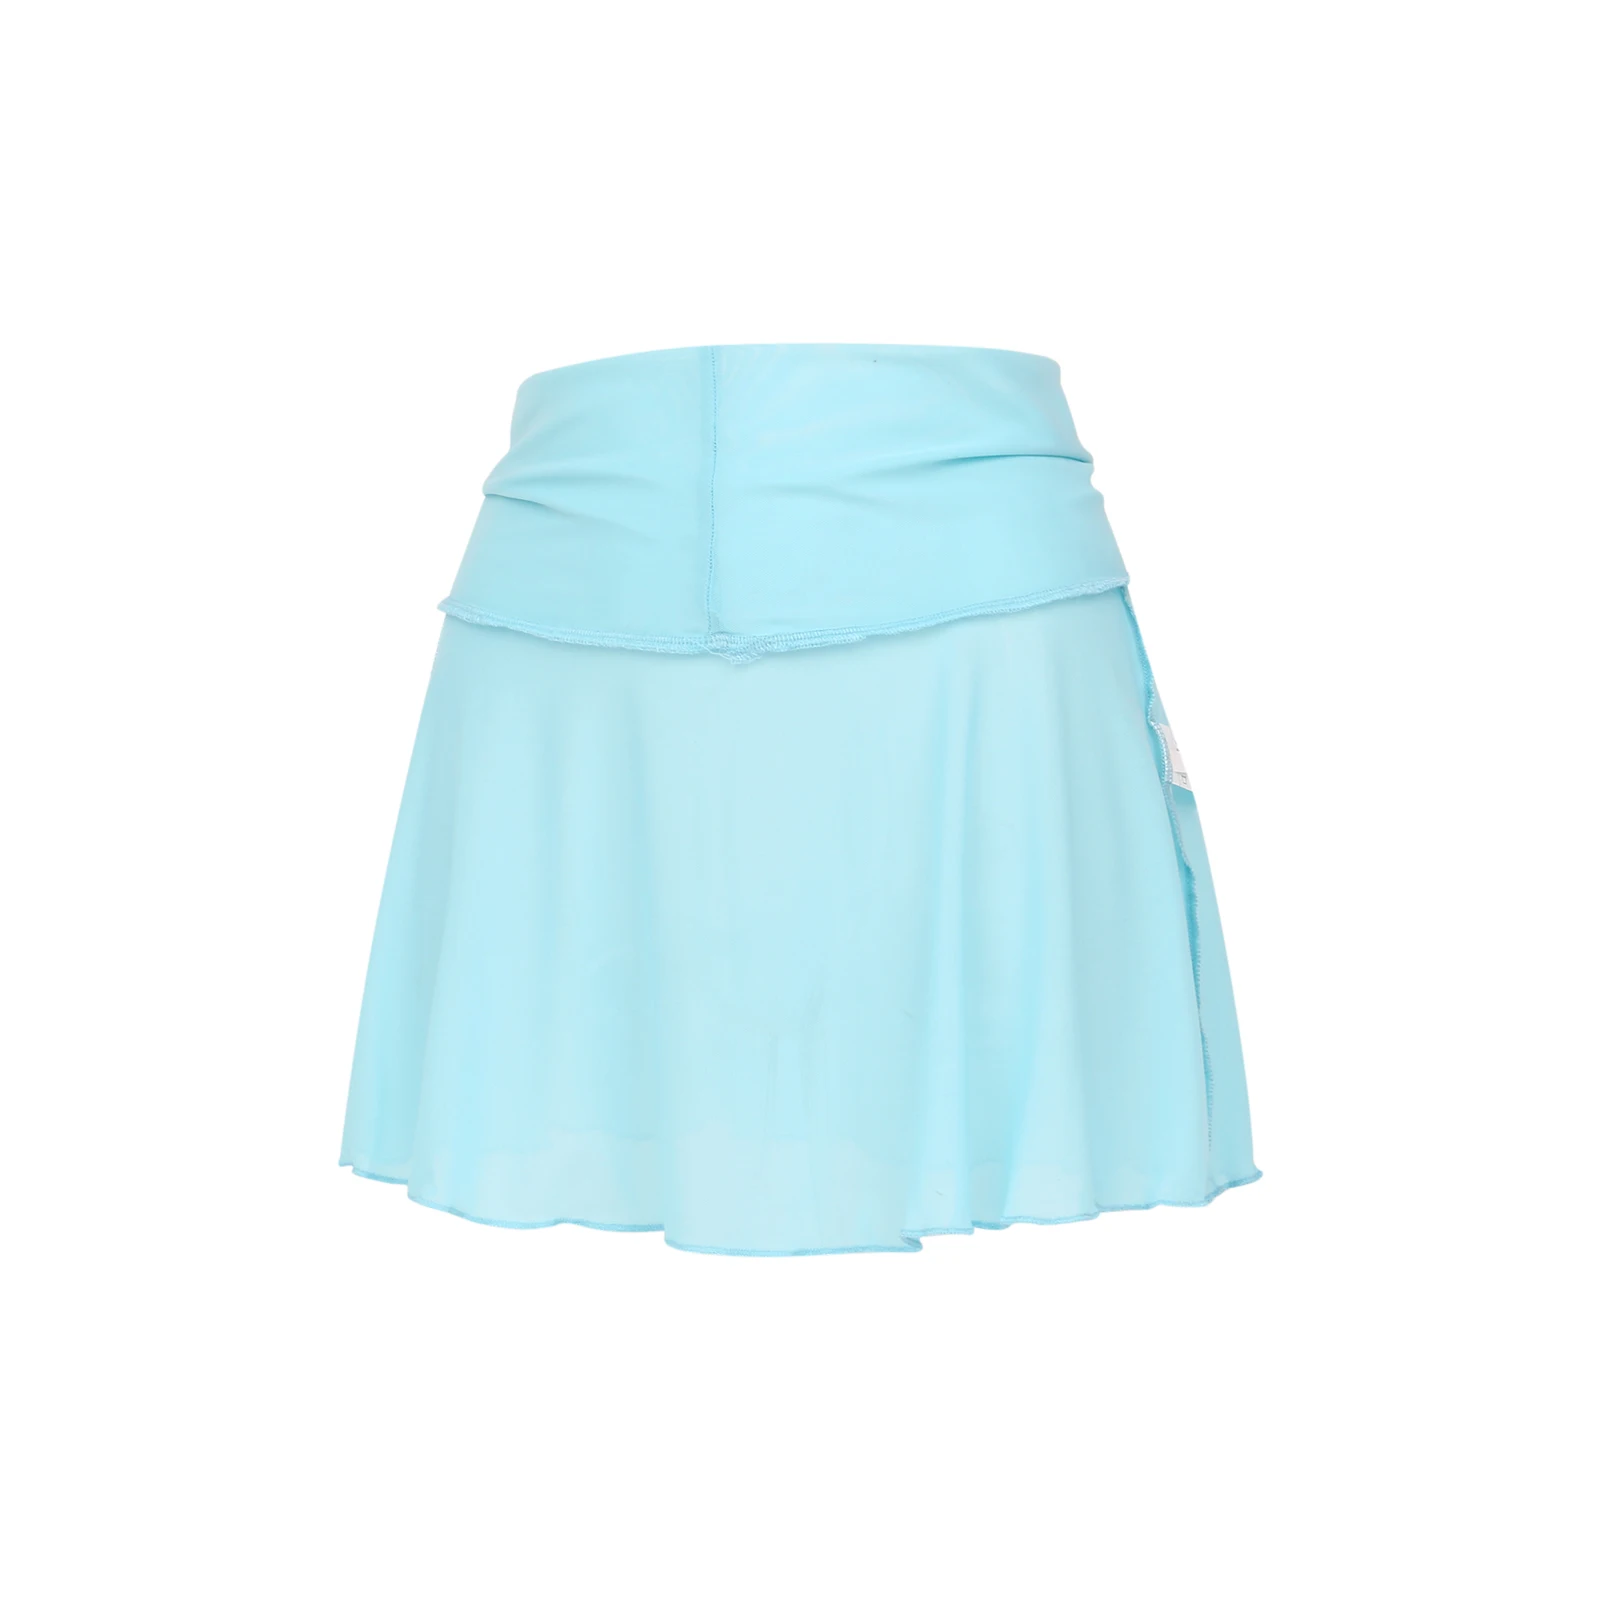 S7be7656899c94539b31e7c3c687cf1faF 2022 Women A-Line Rave High Waist Mini Skirts Summer Solid Color See Through Fishnet Short Pleated Skirt Festival Clothes